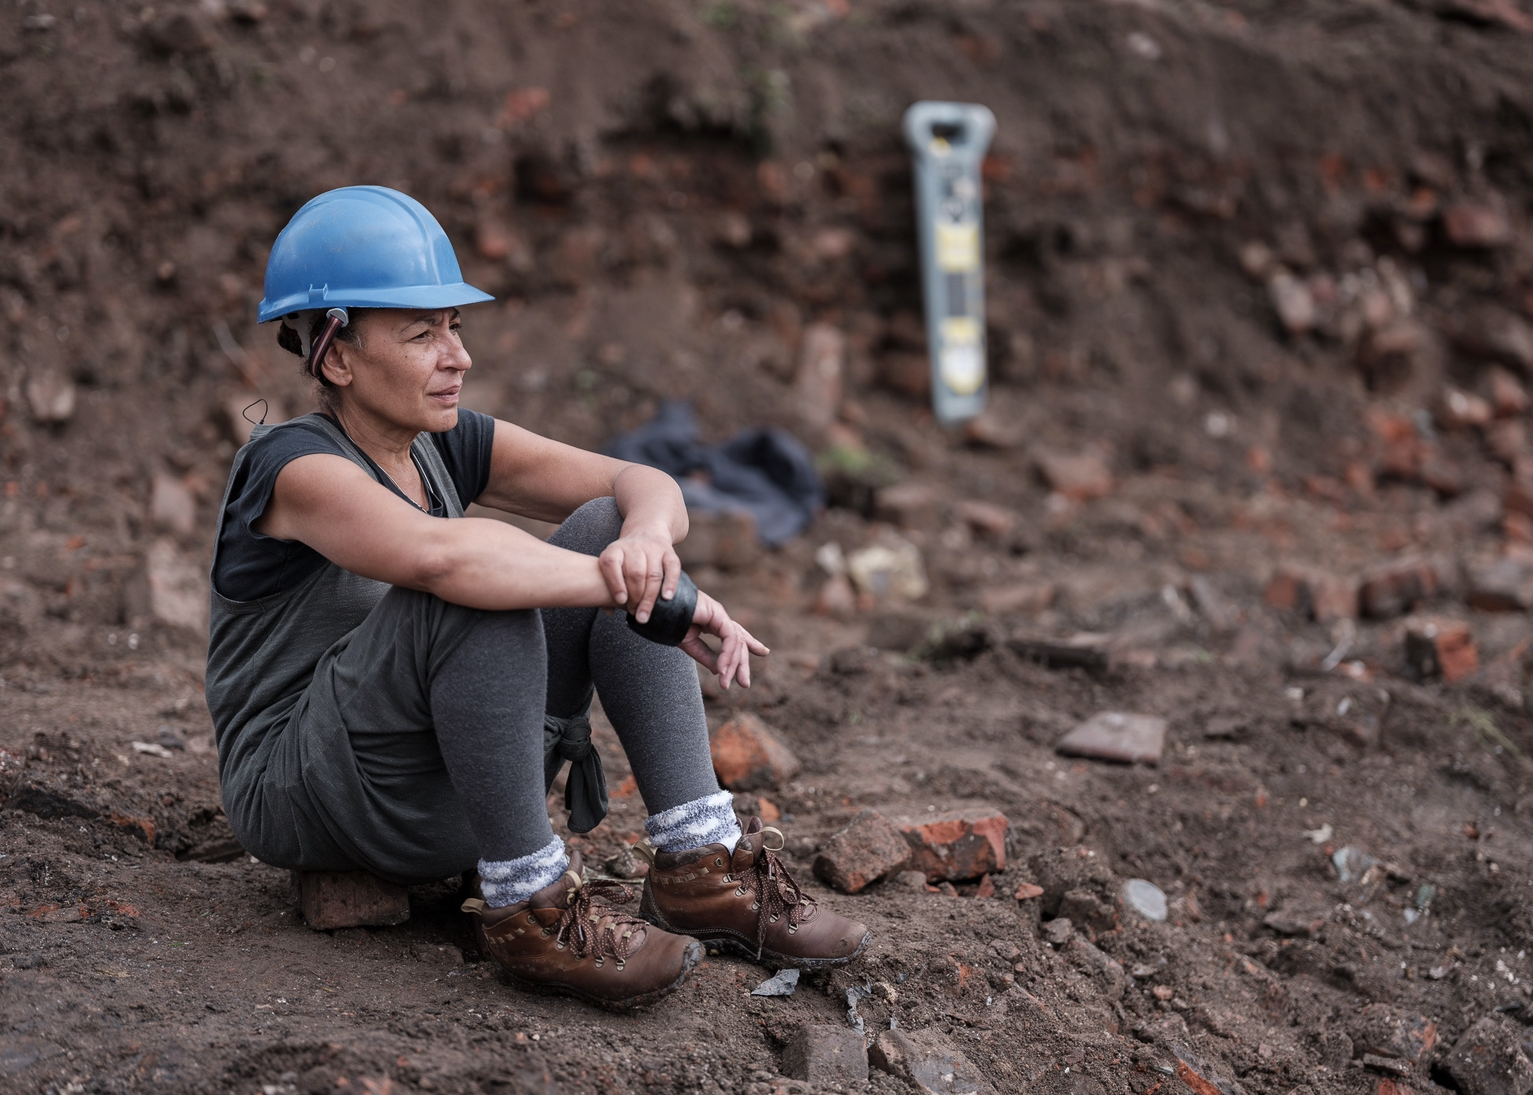 Linda Brogan sat on a brick in a builders hat at excavation of the Reno surrounded by rubble